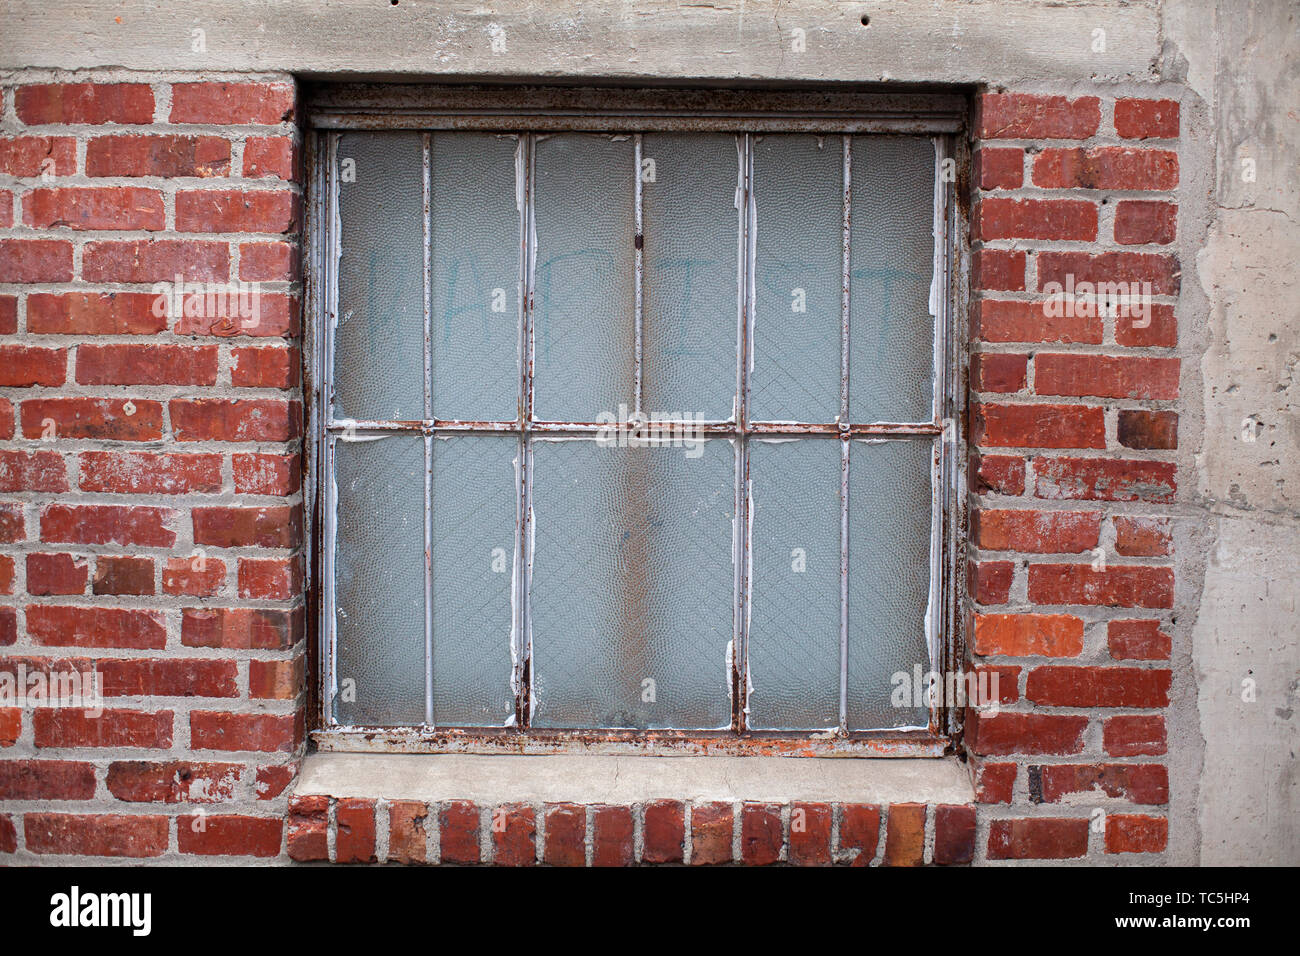 Window with the word 'Rapist' faintly visible written on the glass. Stock Photo